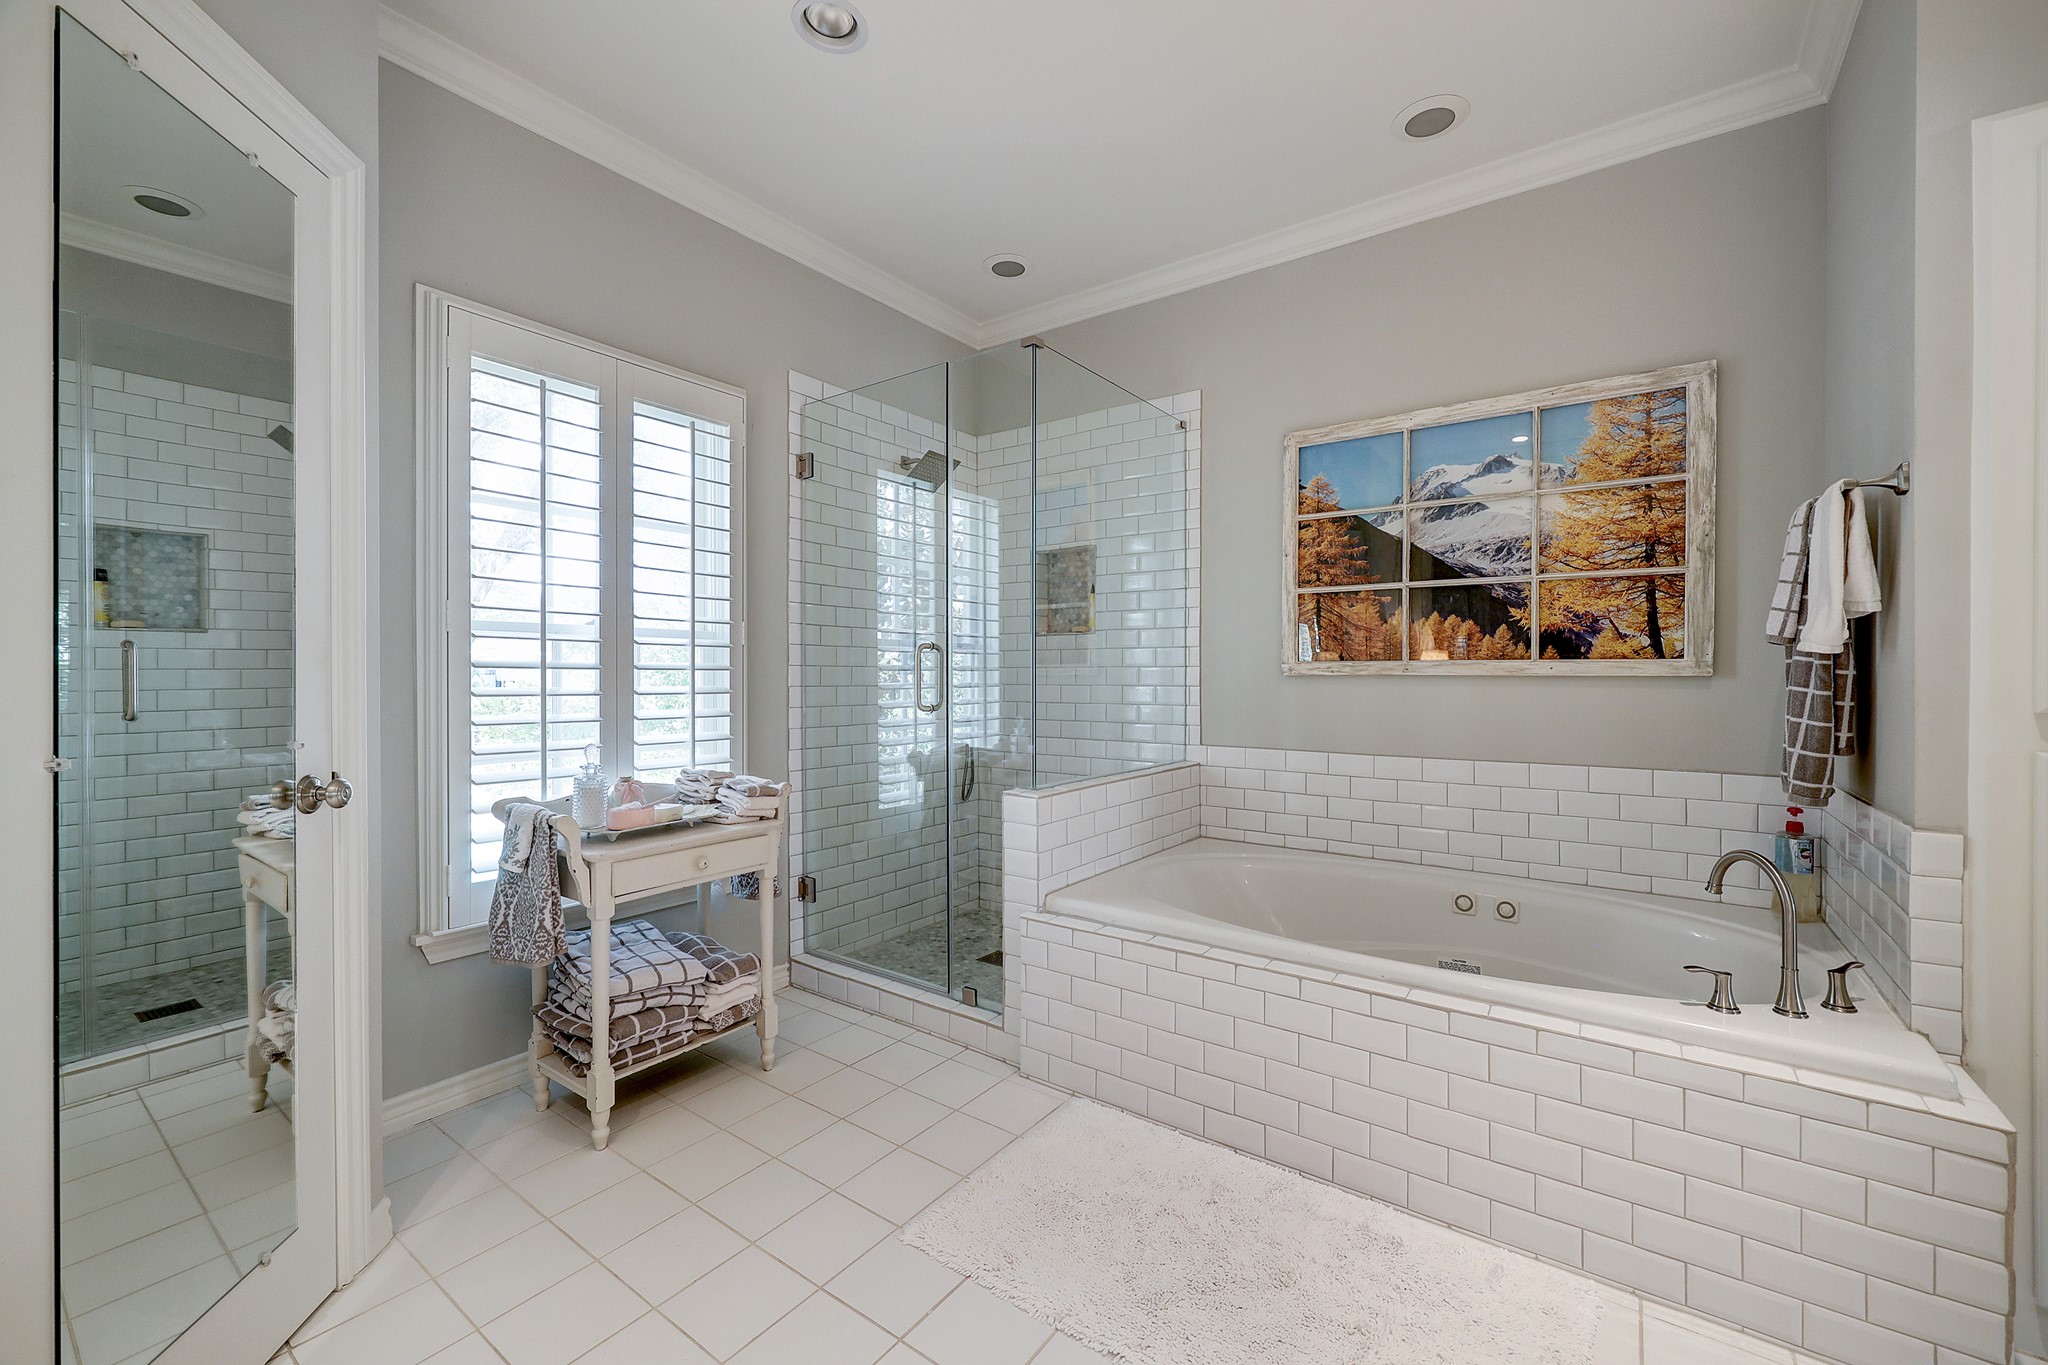 The shower and tub tile is fresh and new to create a clean, aesthetic vibe.